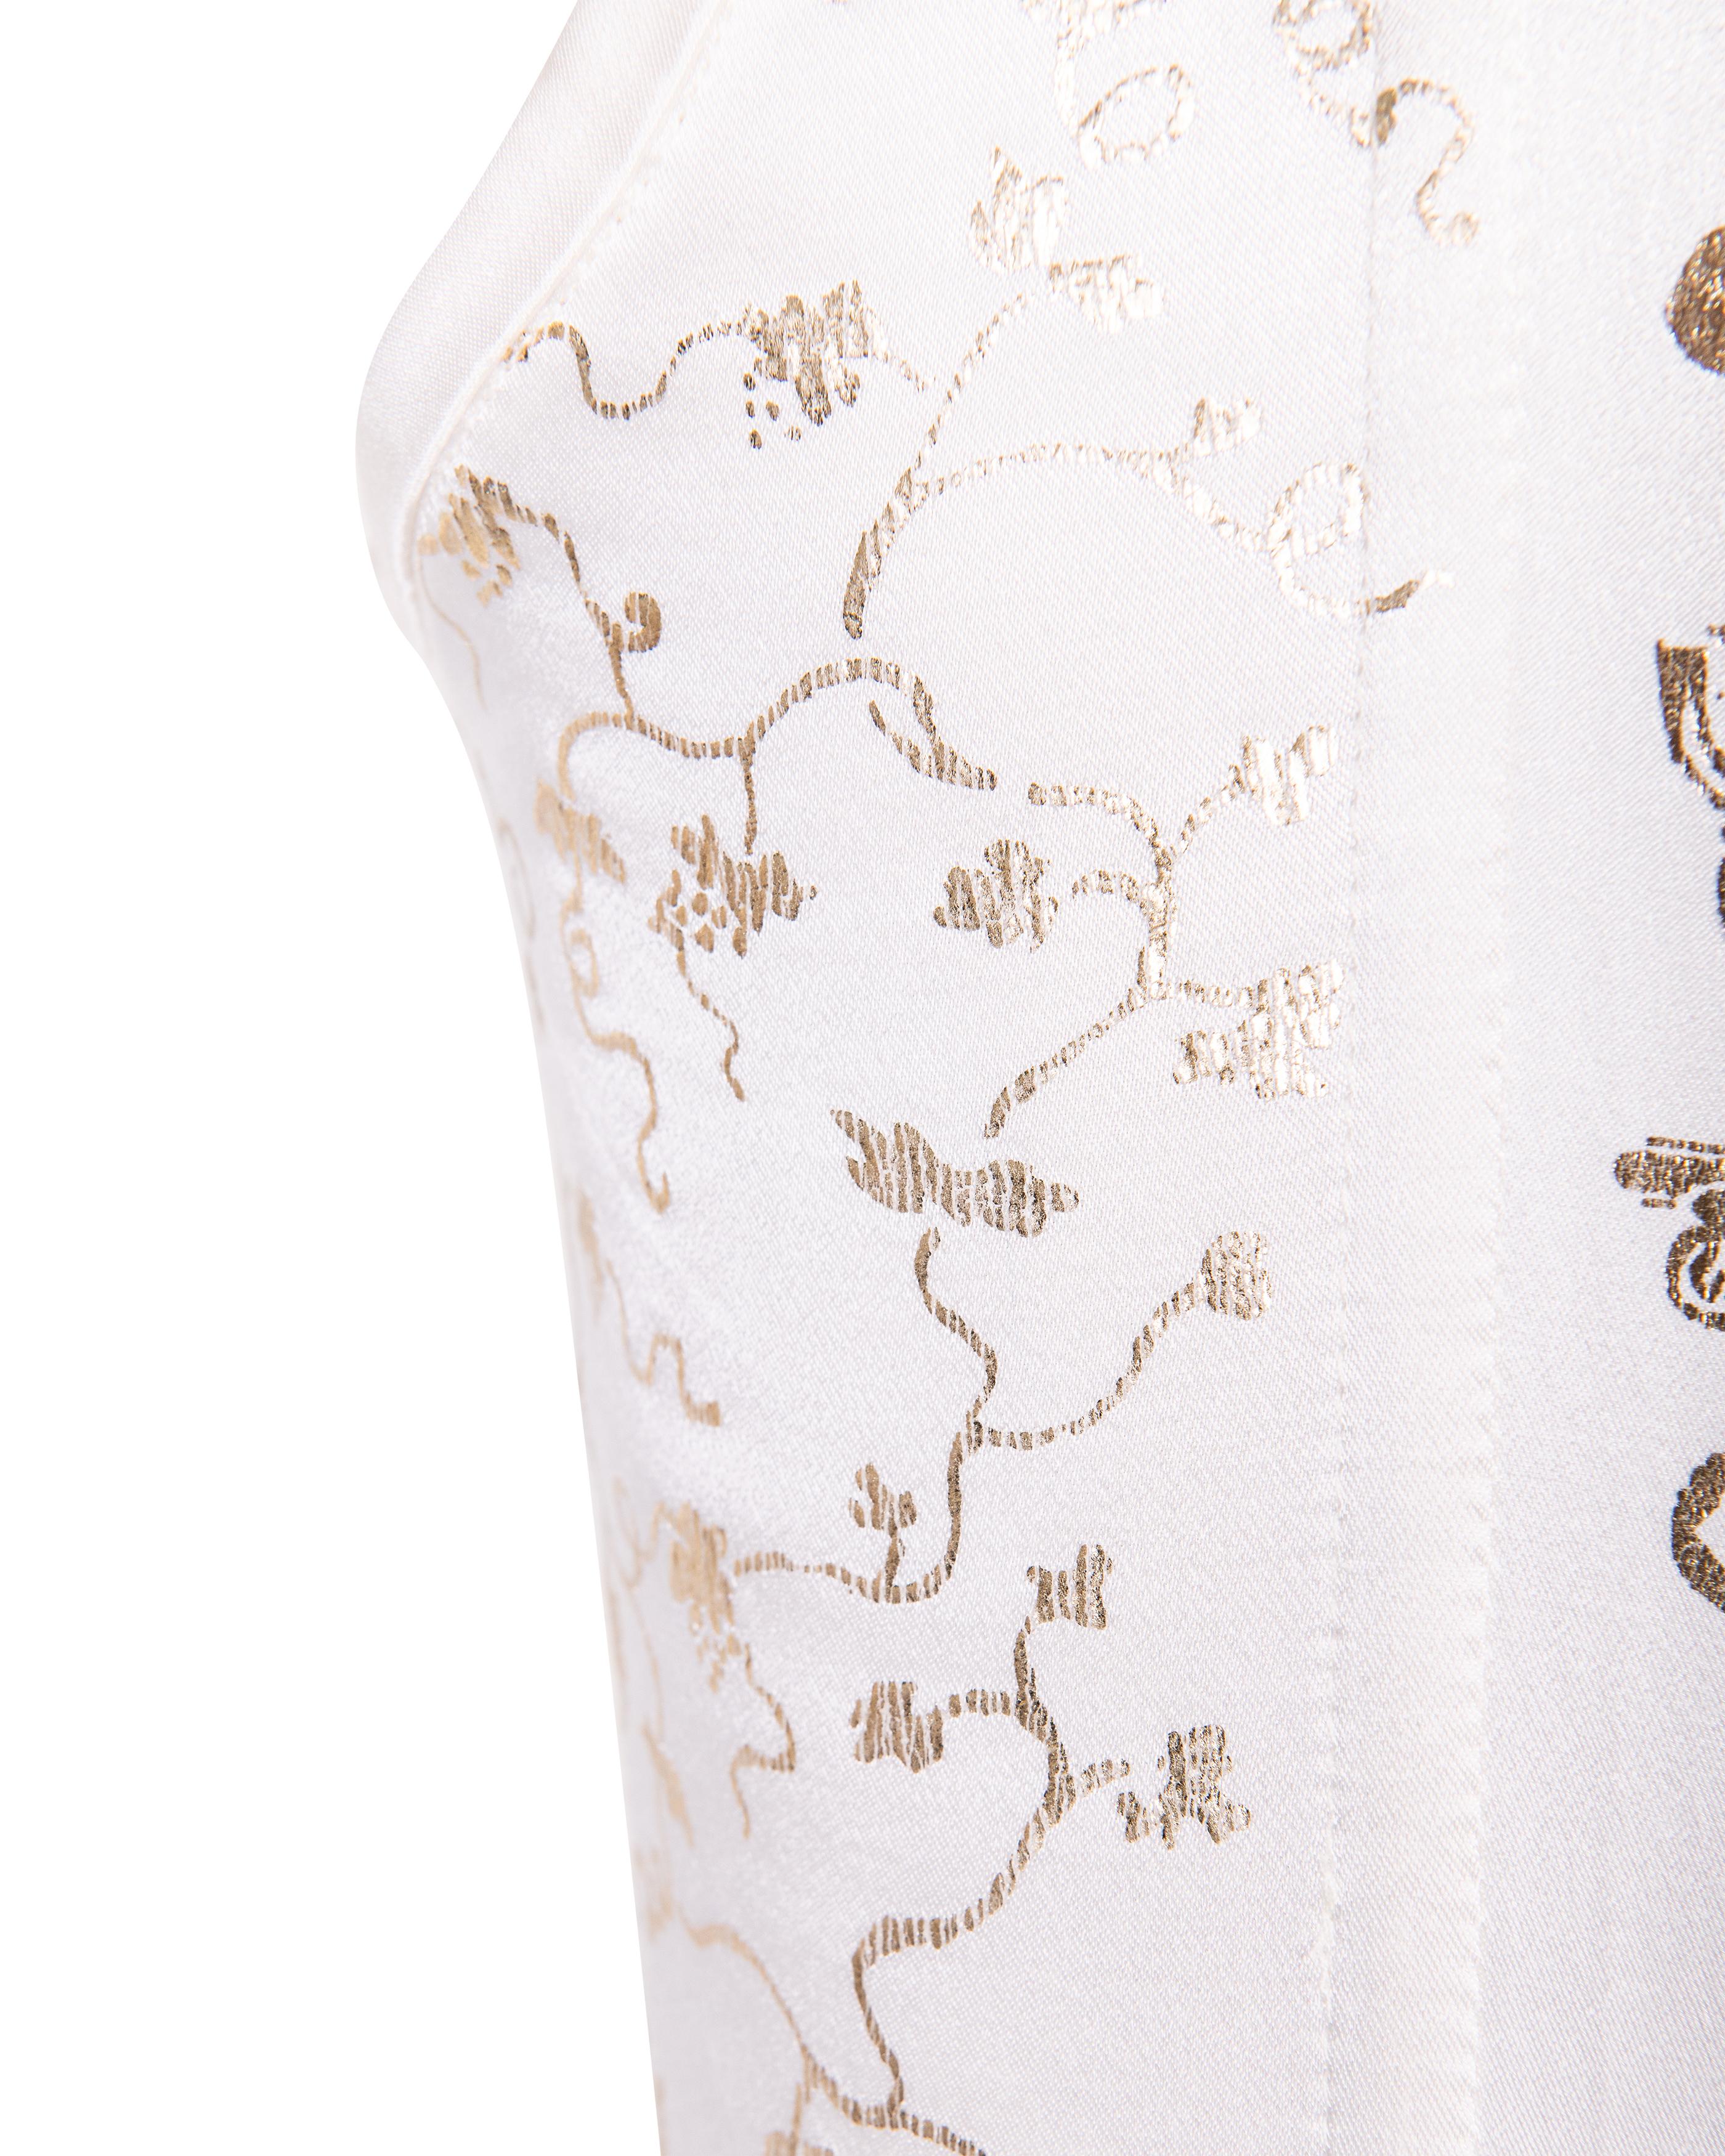 A/W 1991 Vivienne Westwood White and Gold Boulle Print Corset 1